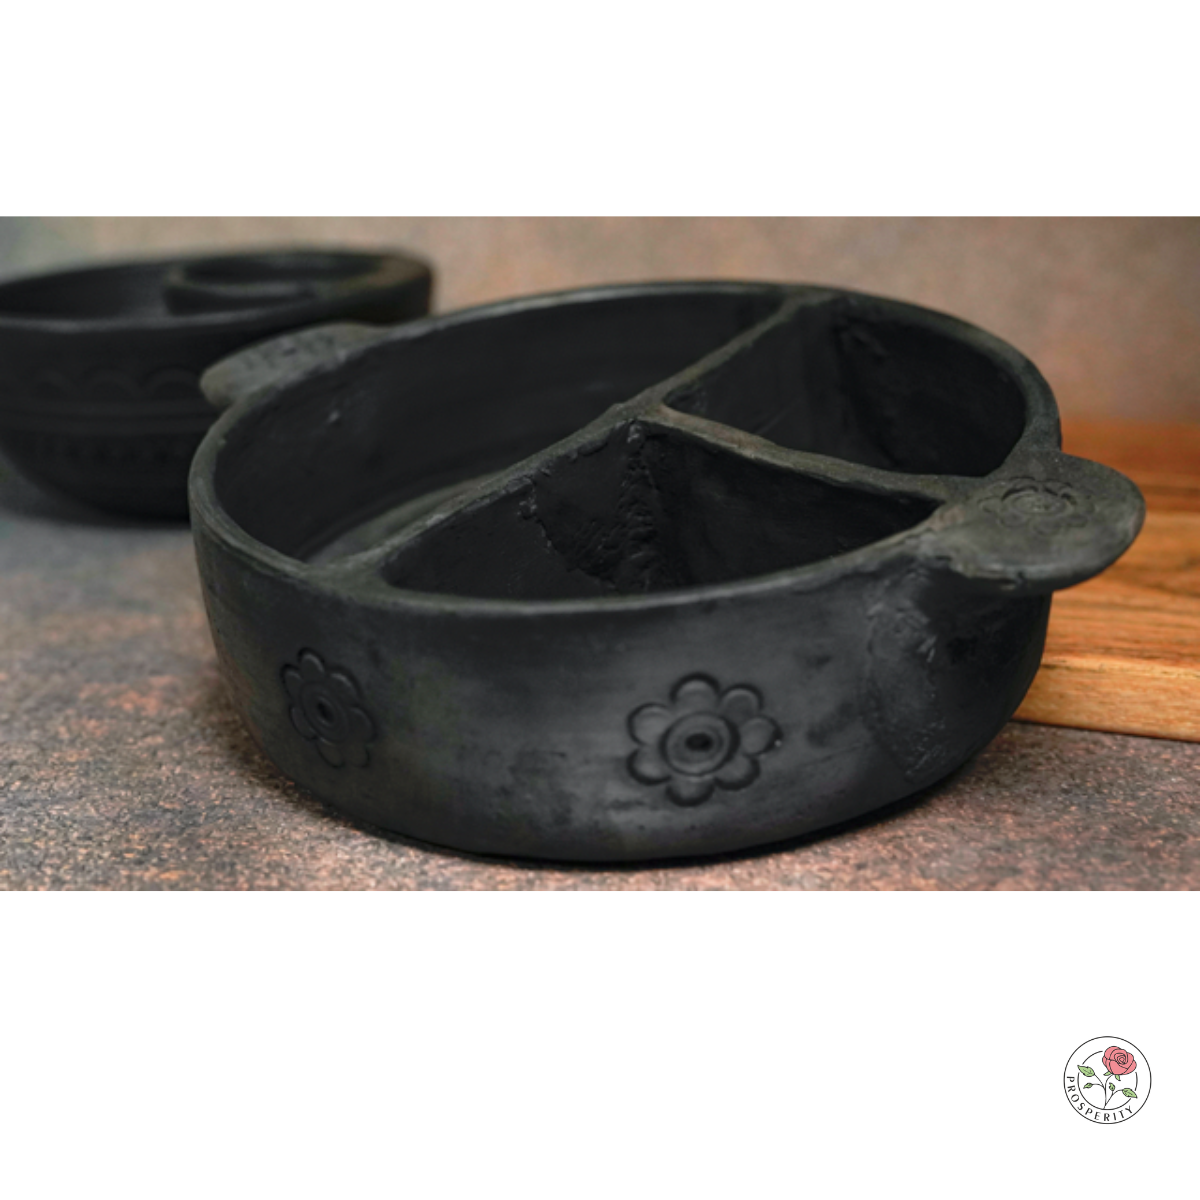 Sawai Madhopur Black Pottery Partition tray/Condiment holder